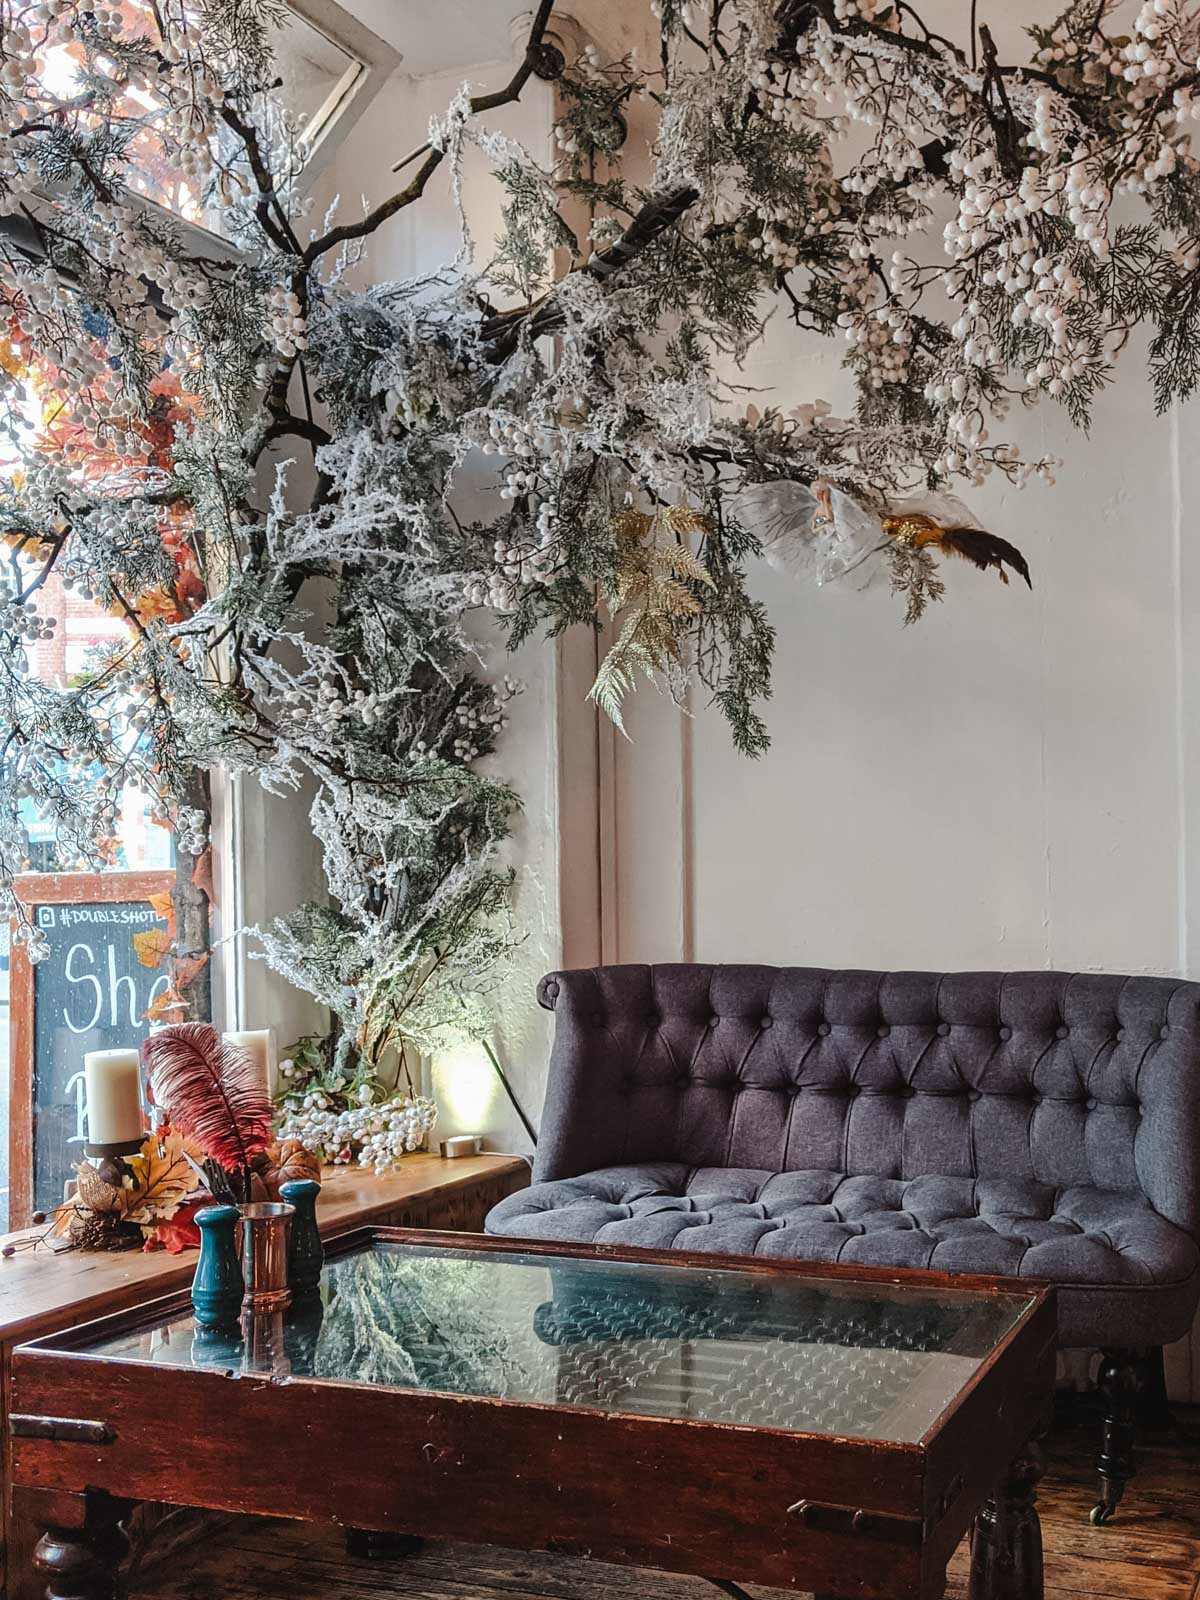 Interior of non touristy London cafe with tufted sofa, glass topped coffee table, and winter branch display.